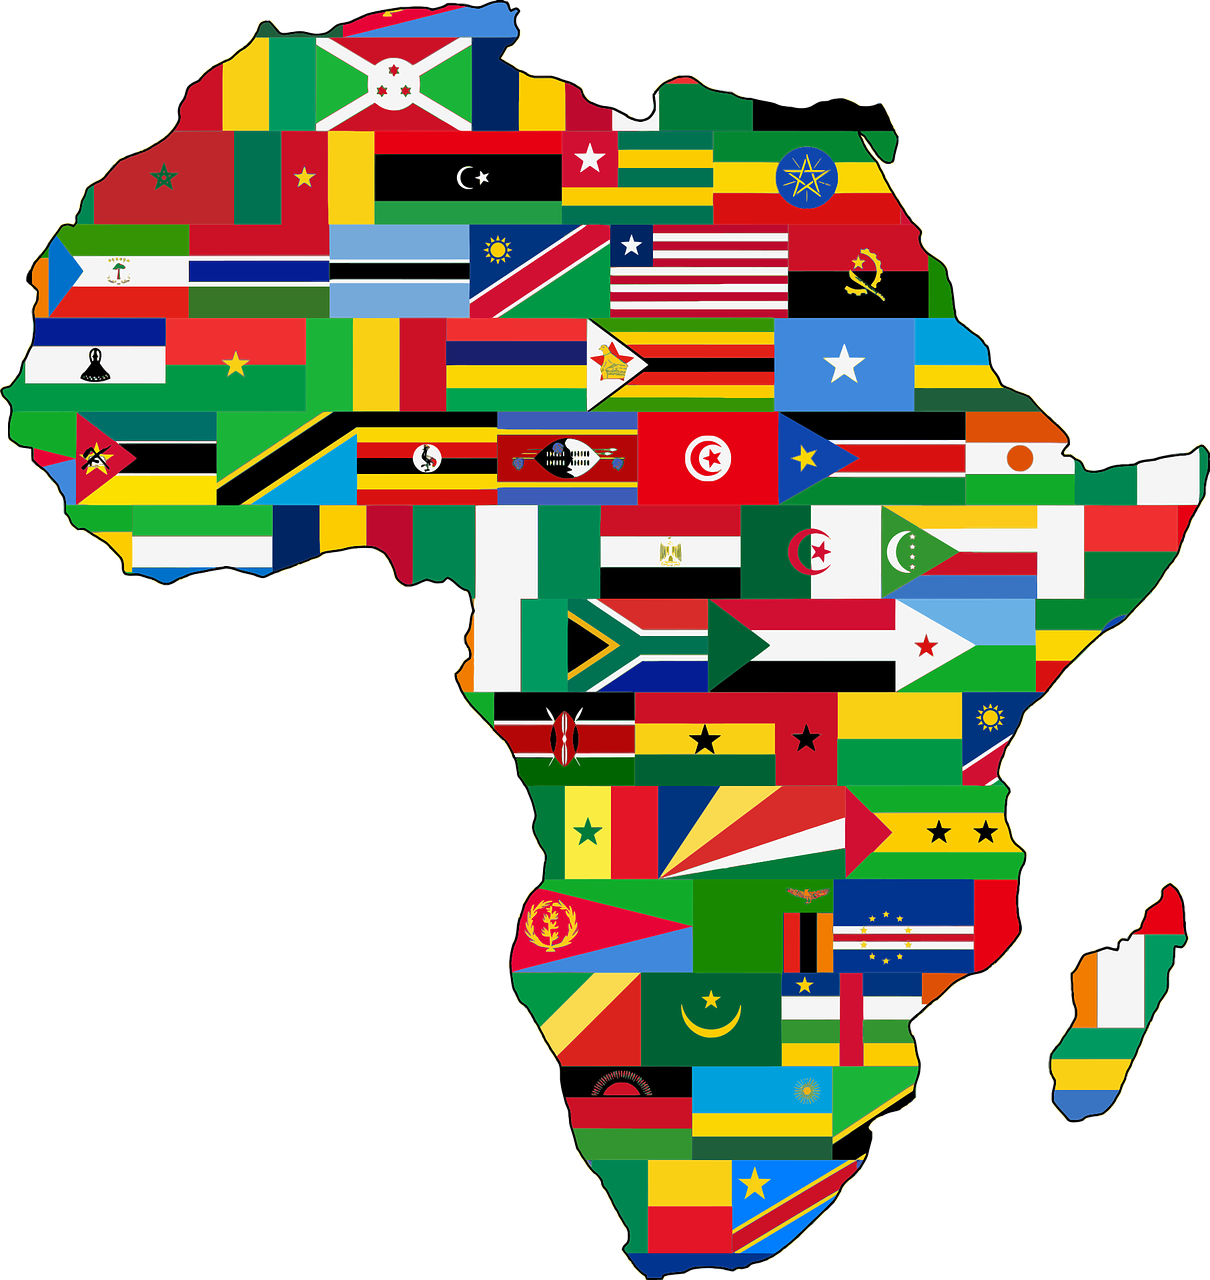 Africa Day: Celebrating the successes of pan-African cooperation for over 50 years